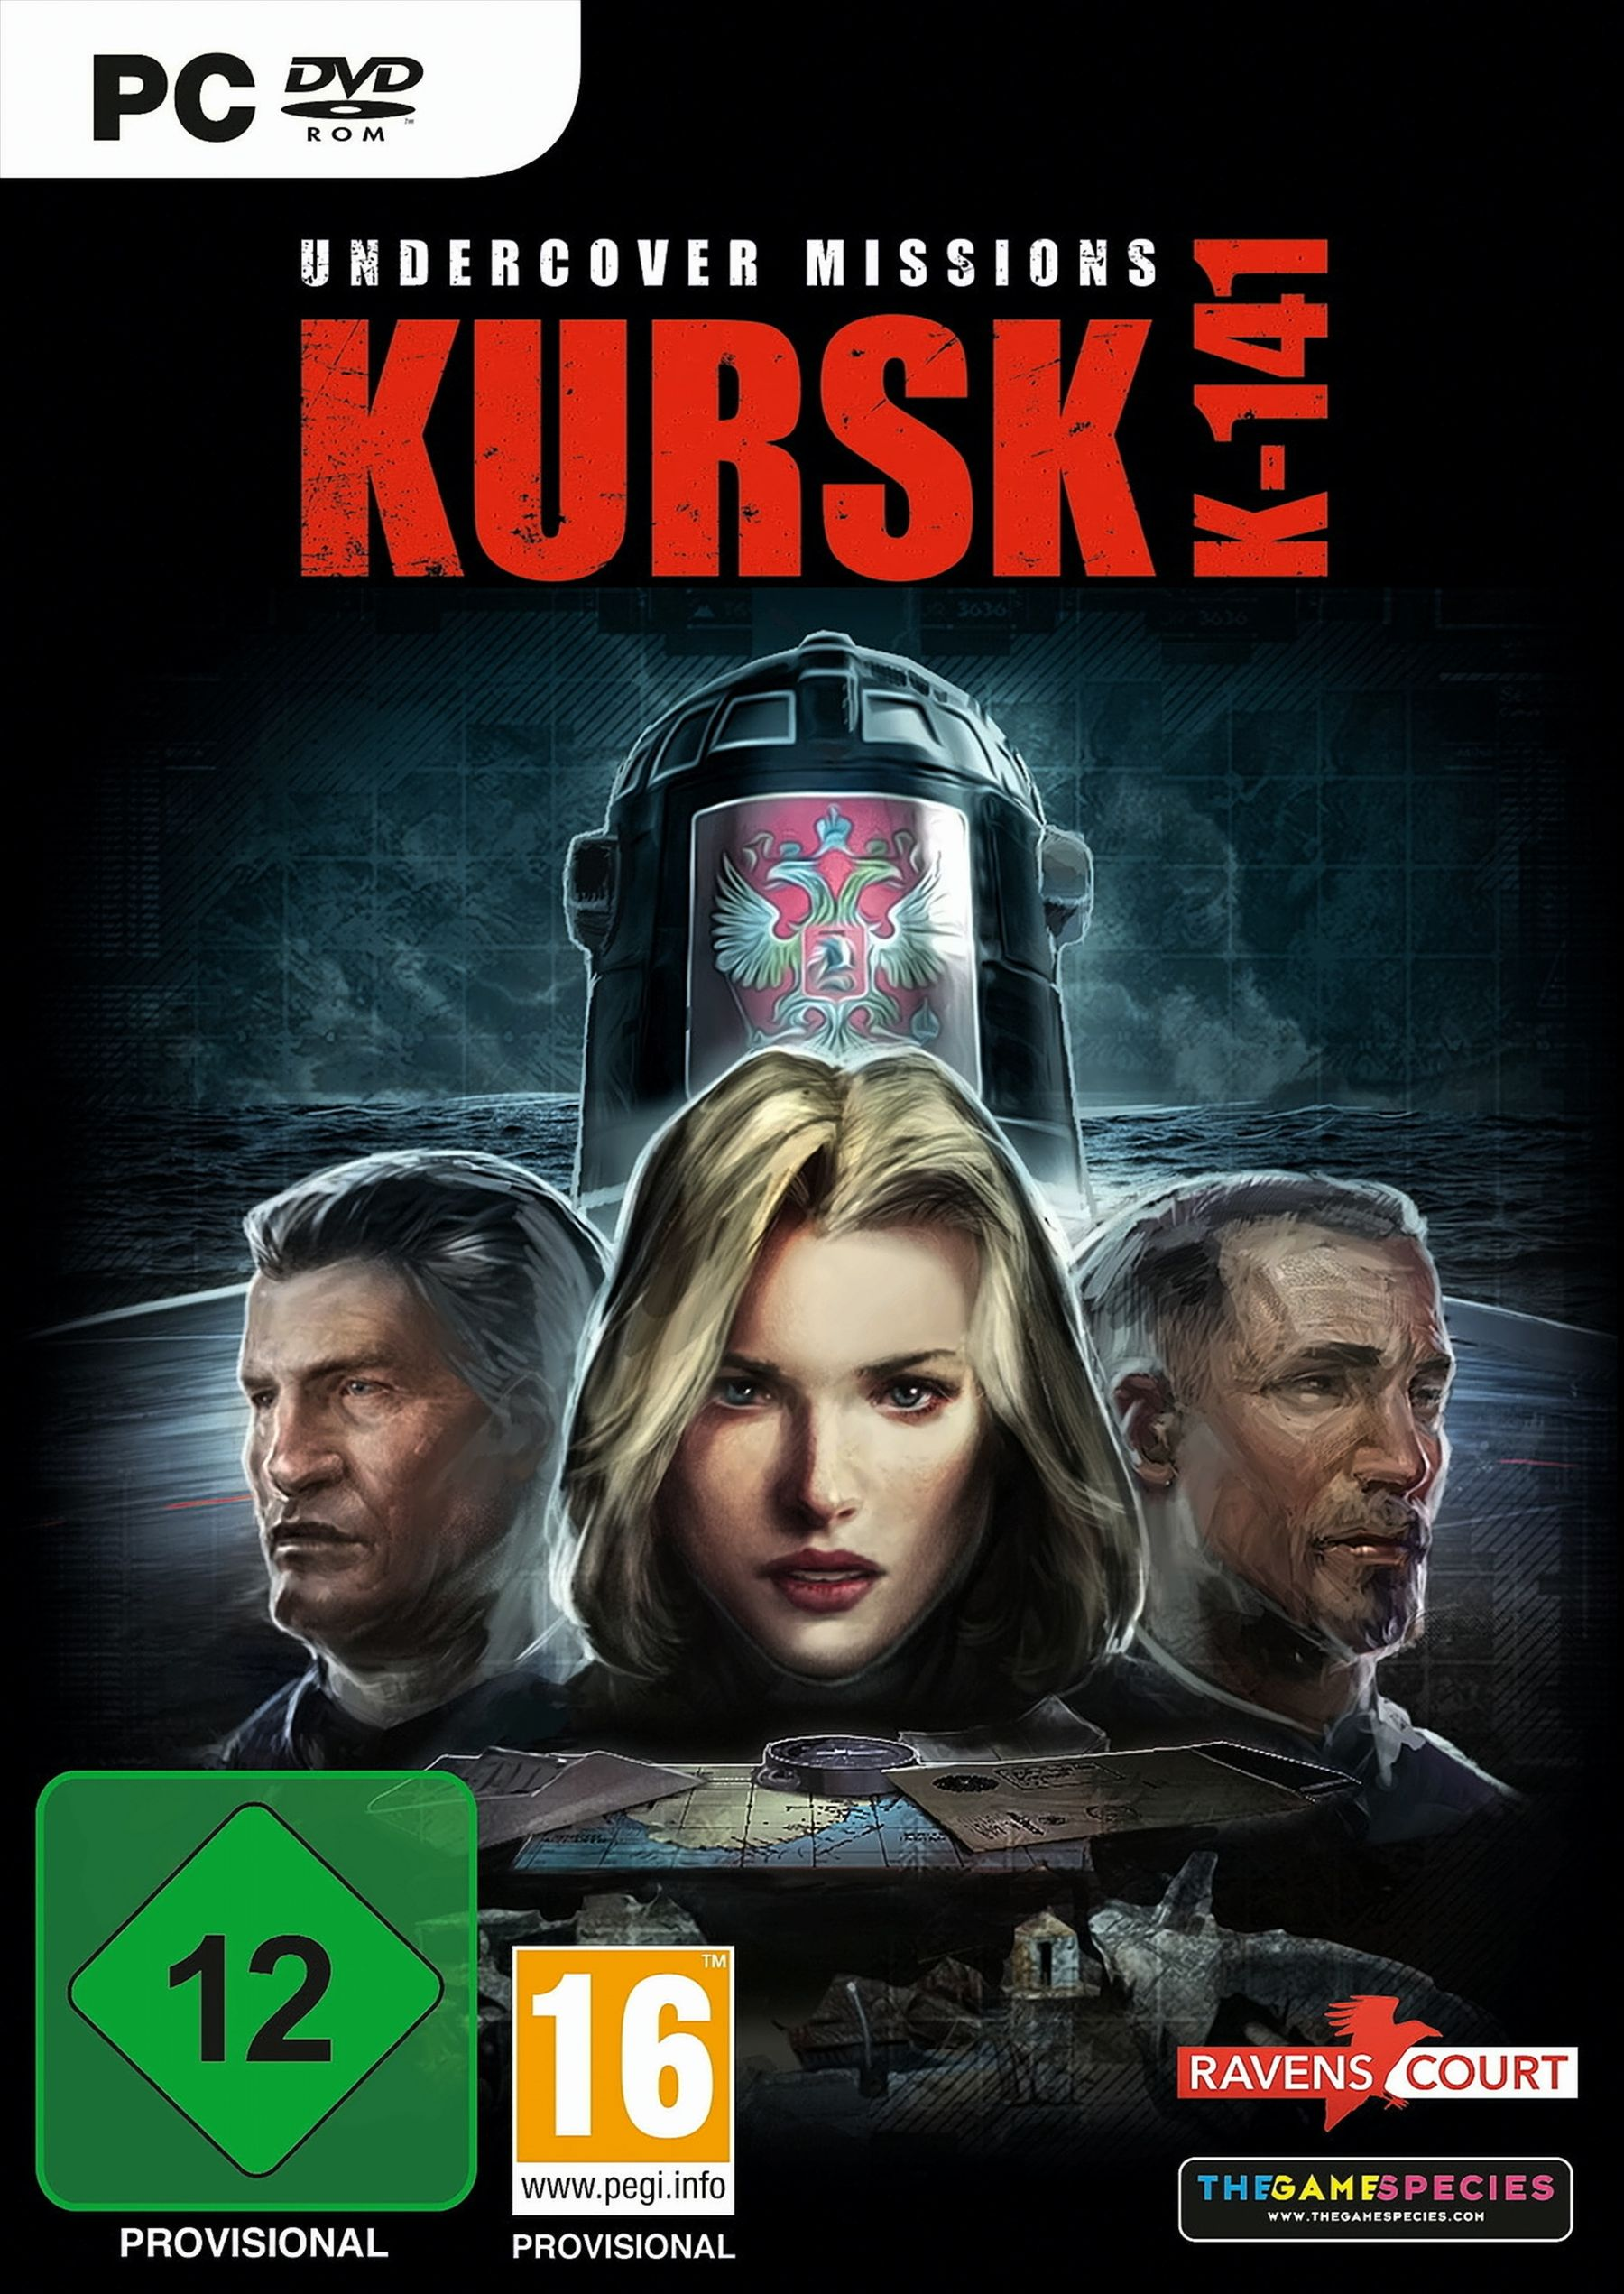 K-141 Operation Missions: - Undercover Kursk [PC]